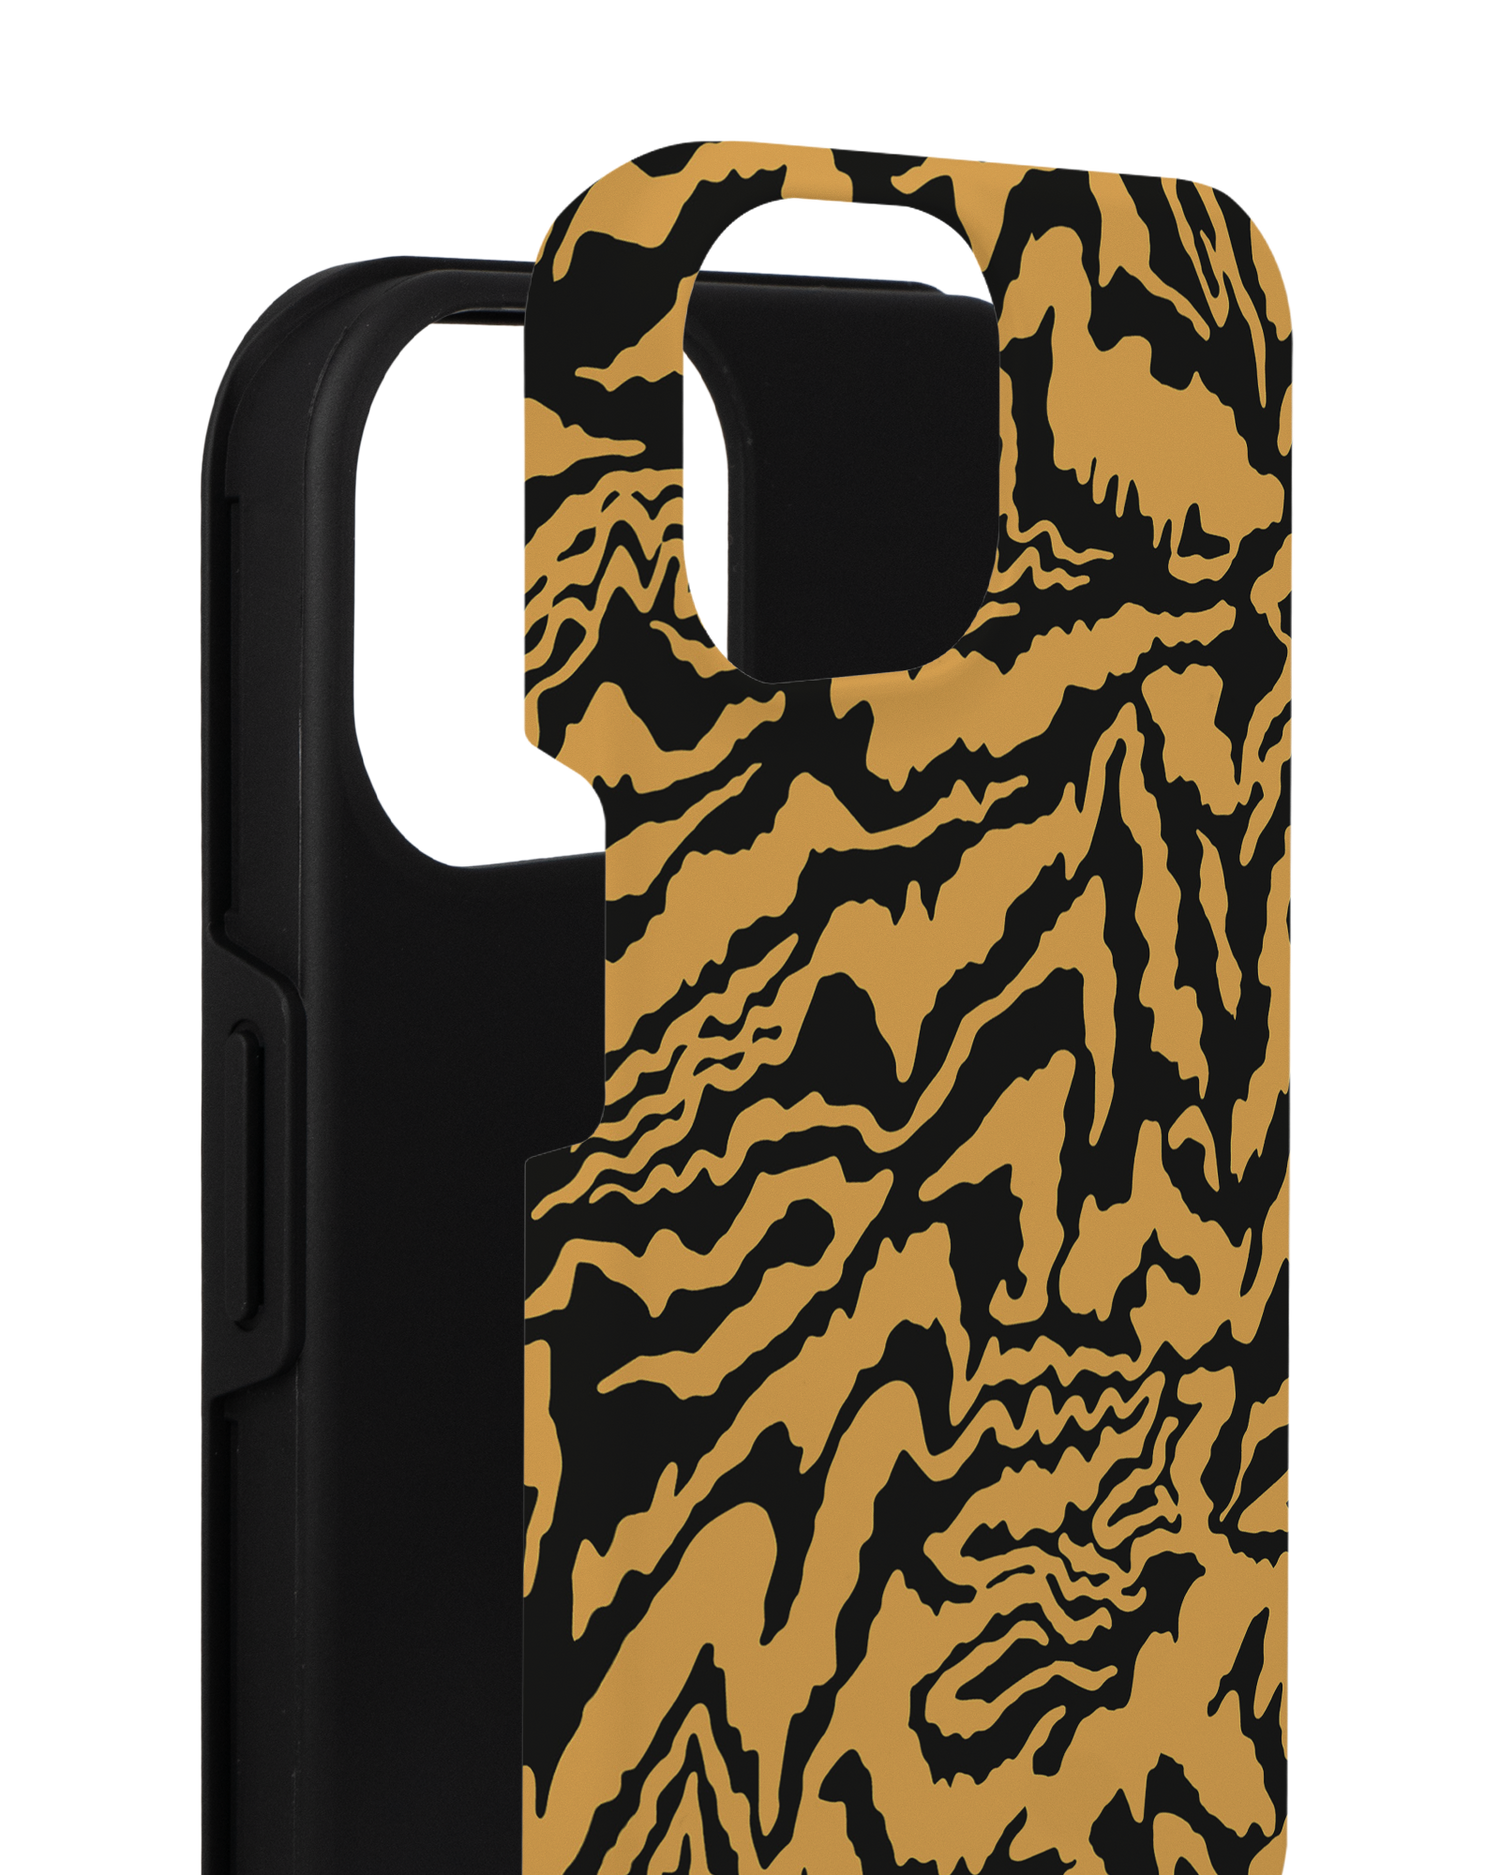 Warped Tiger Stripes Premium Phone for Apple iPhone 14 consisting of 2 parts